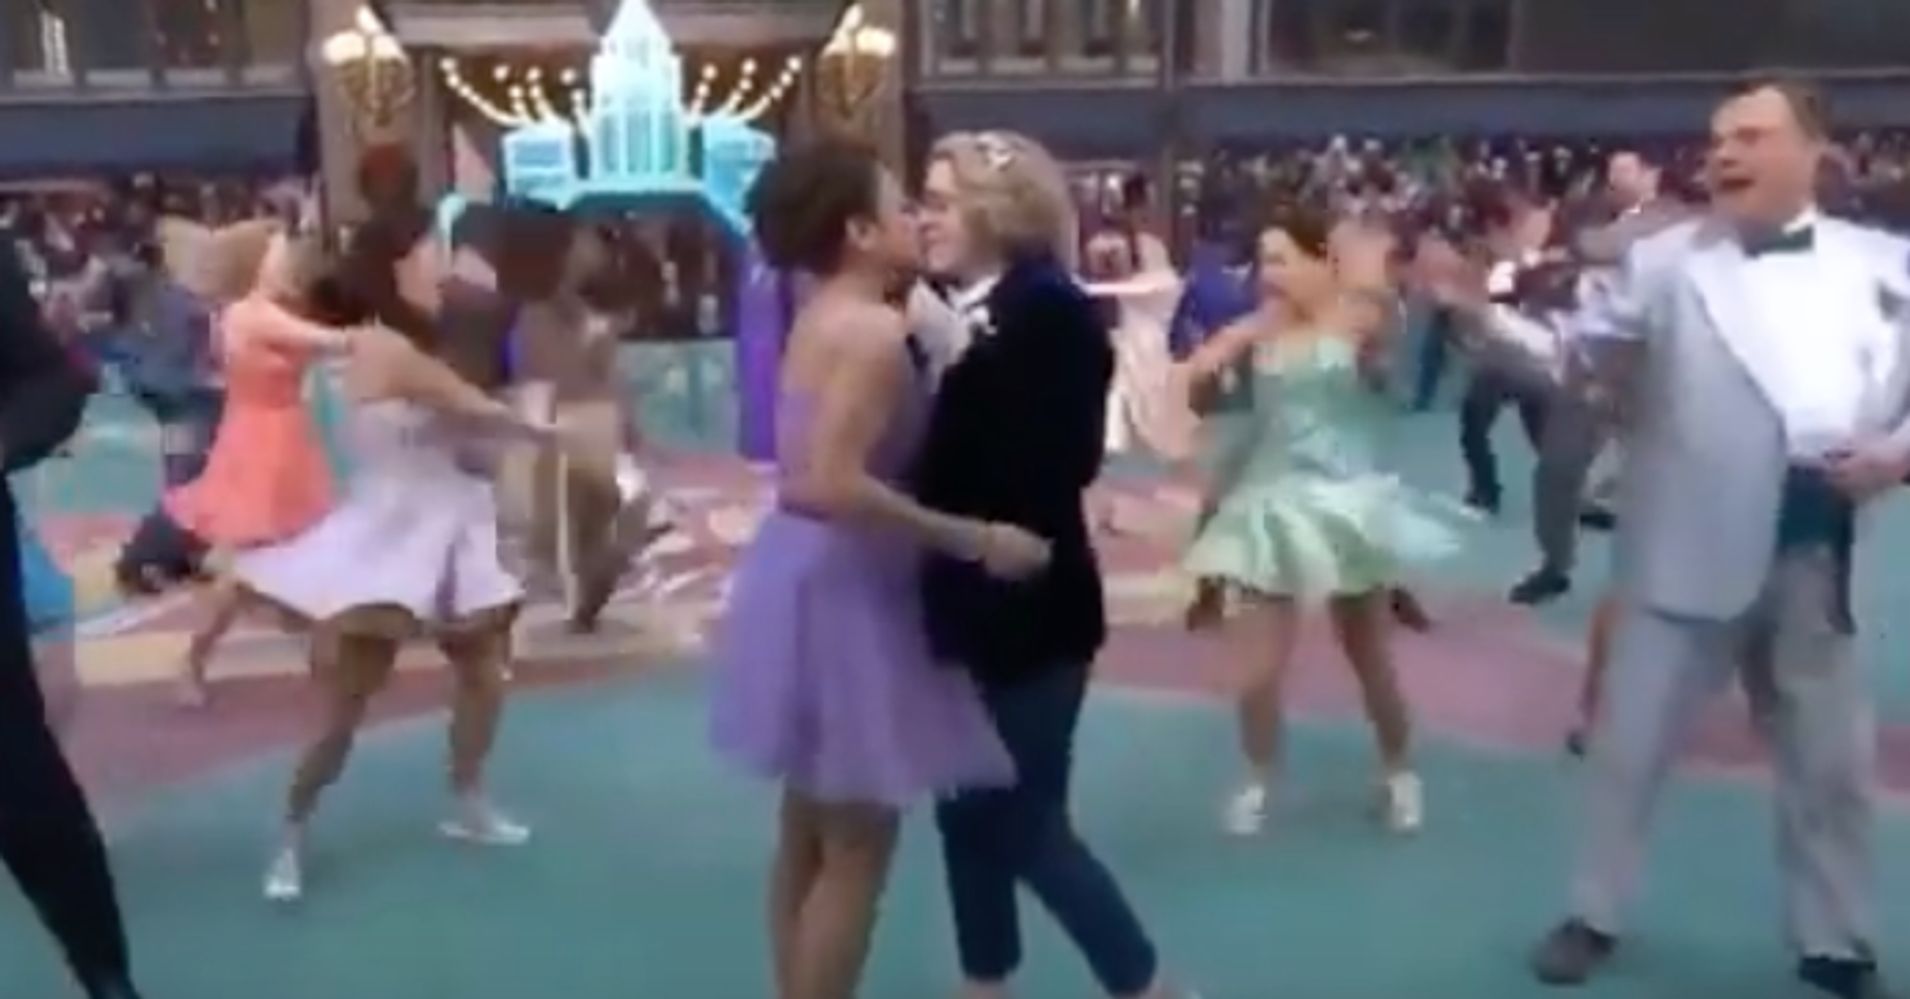 Macy S Thanksgiving Day Parade Features Same Sex Kiss In